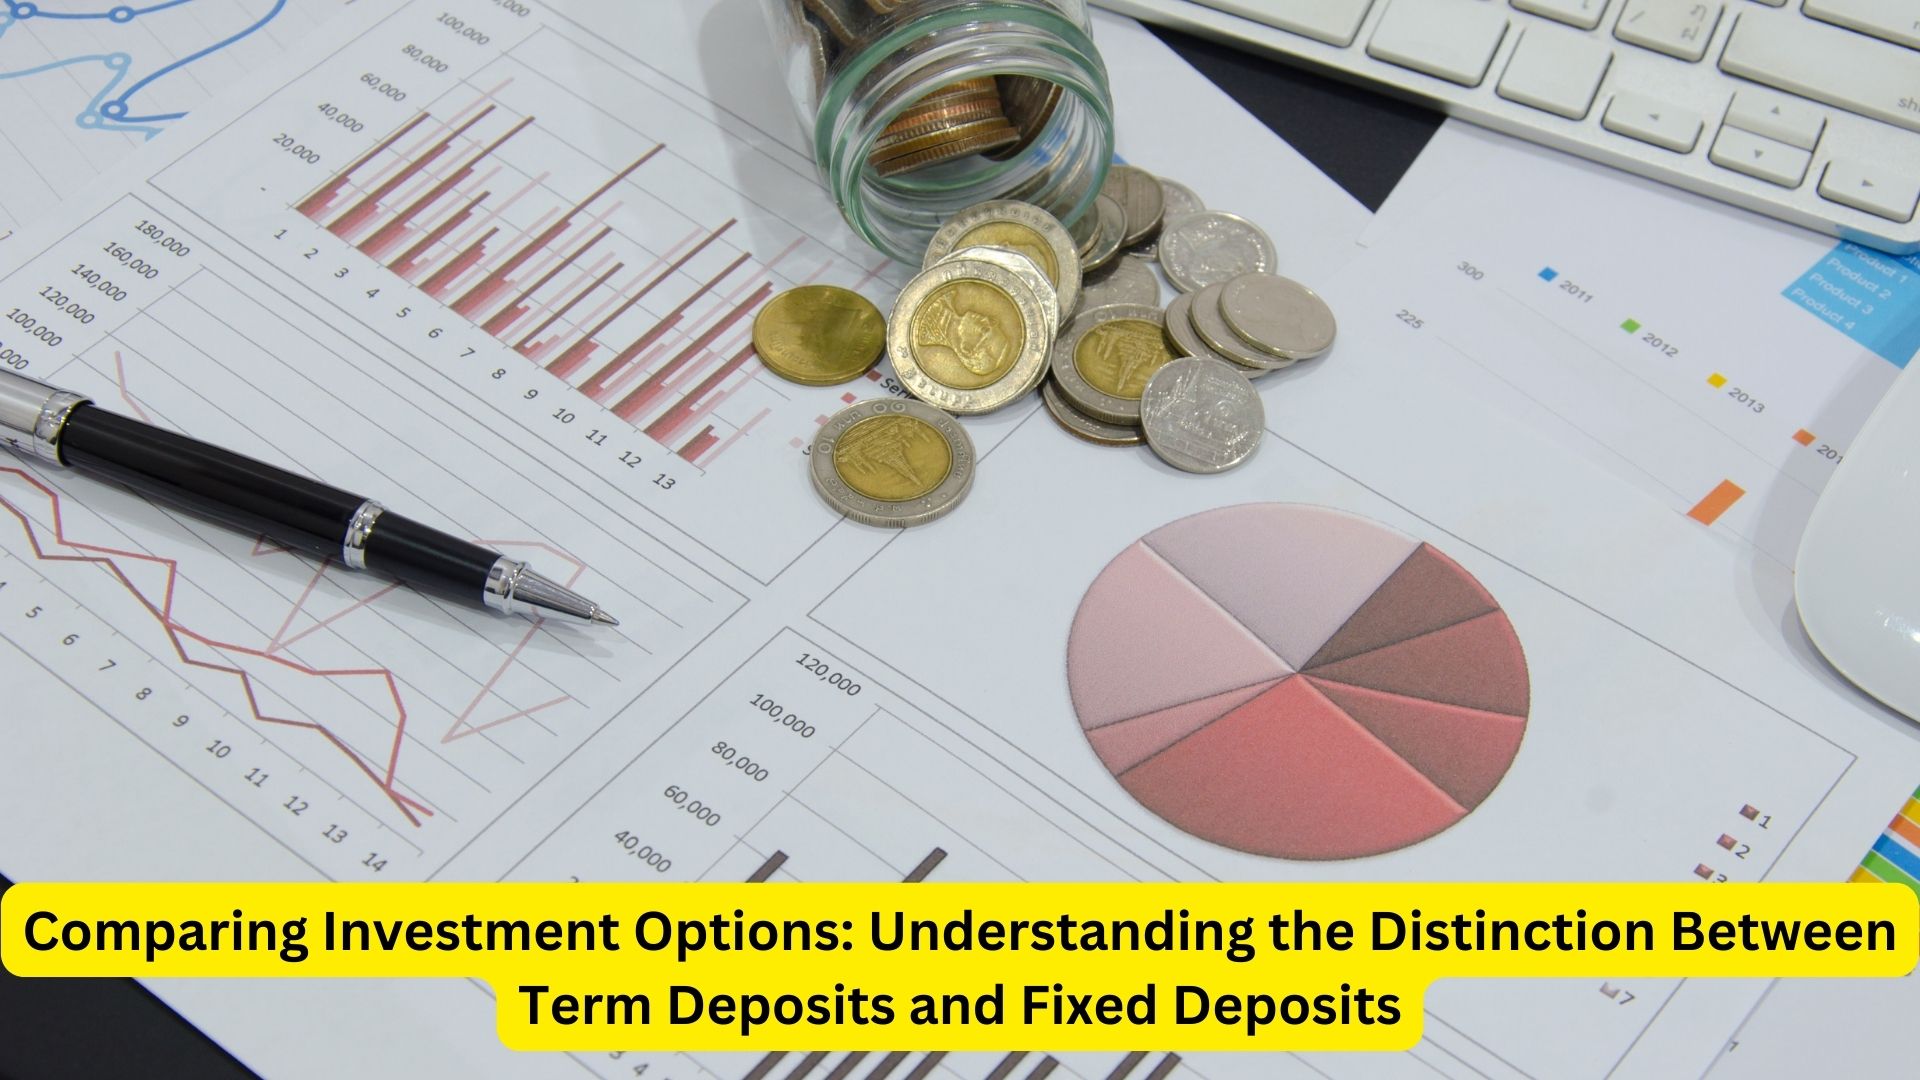 Comparing Investment Options: Understanding the Distinction Between Term Deposits and Fixed Deposits